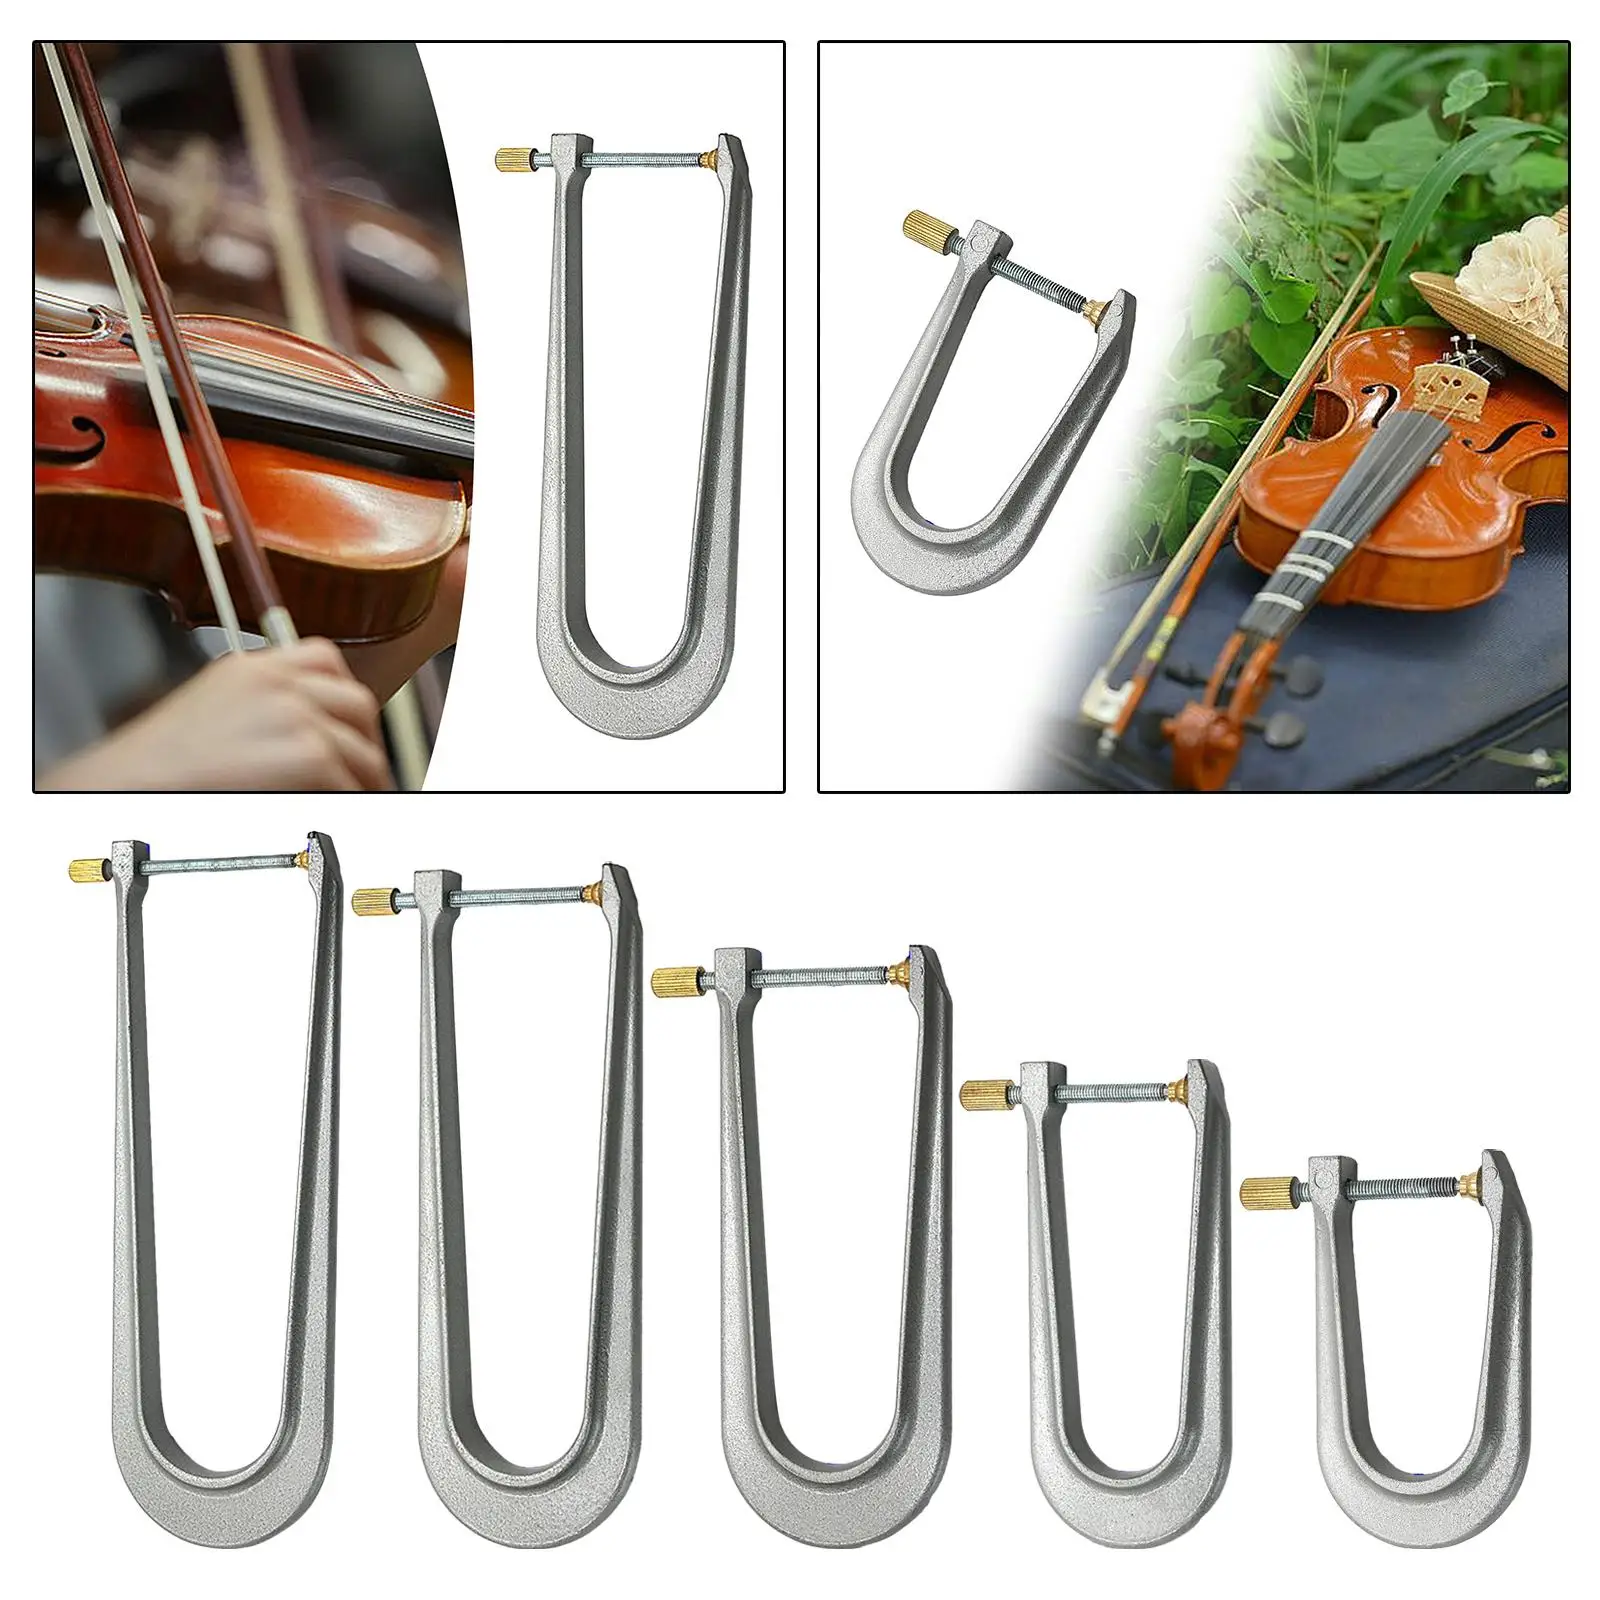 Violin Beam Clamp Instrument Making Tool Metal Easy to Use for Violin Viola Cello Violin Panel Back Plate Bracing Clip Sturdy